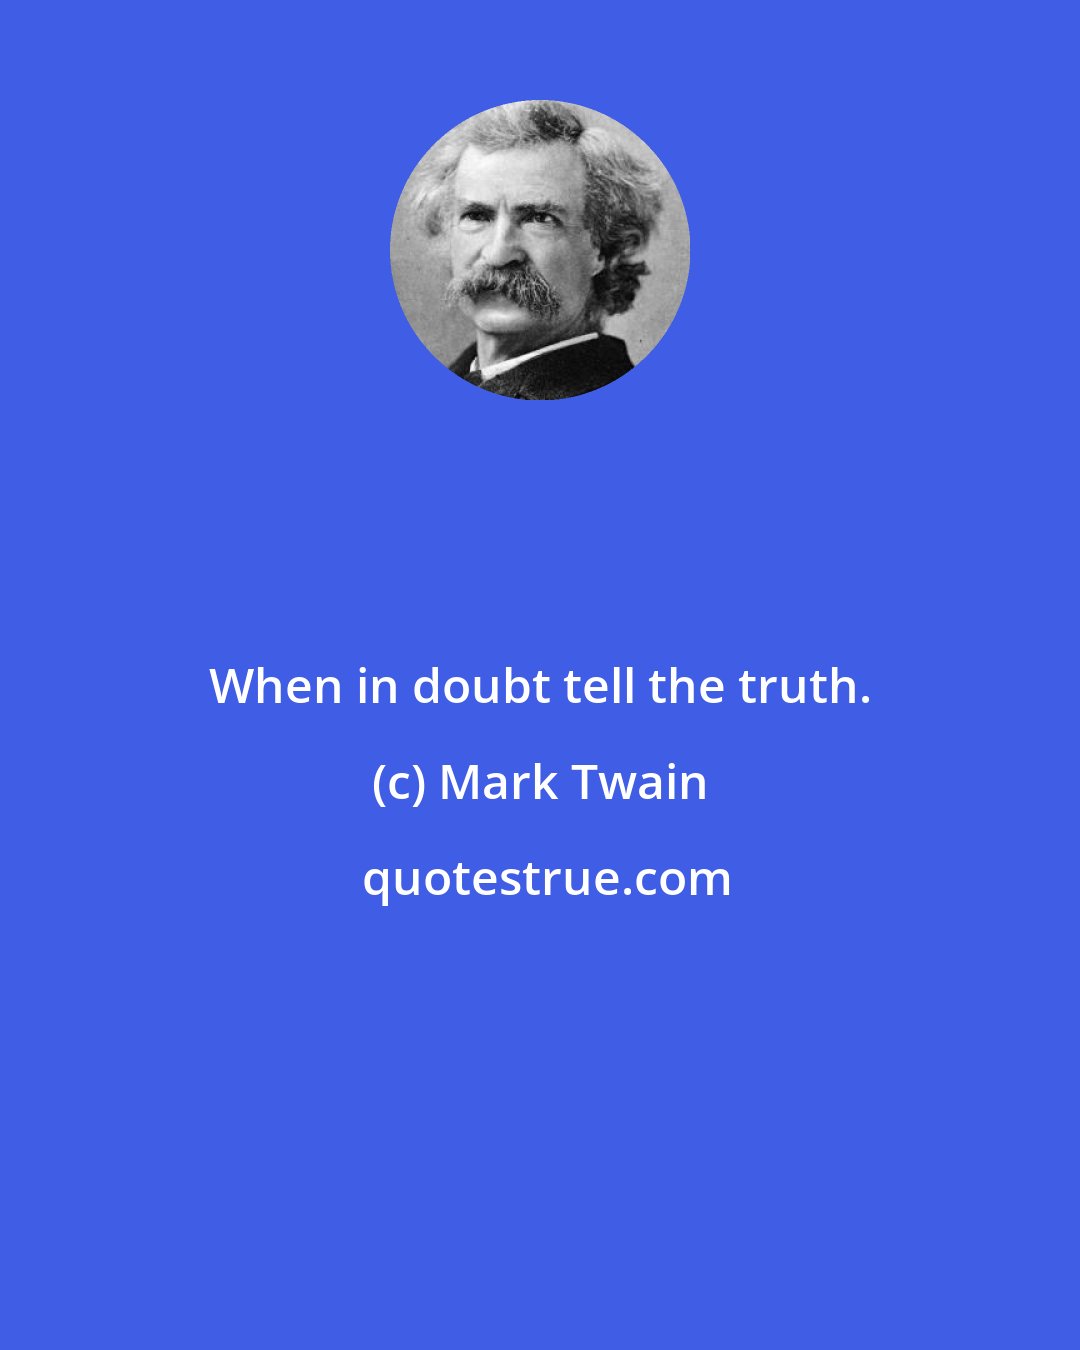 Mark Twain: When in doubt tell the truth.